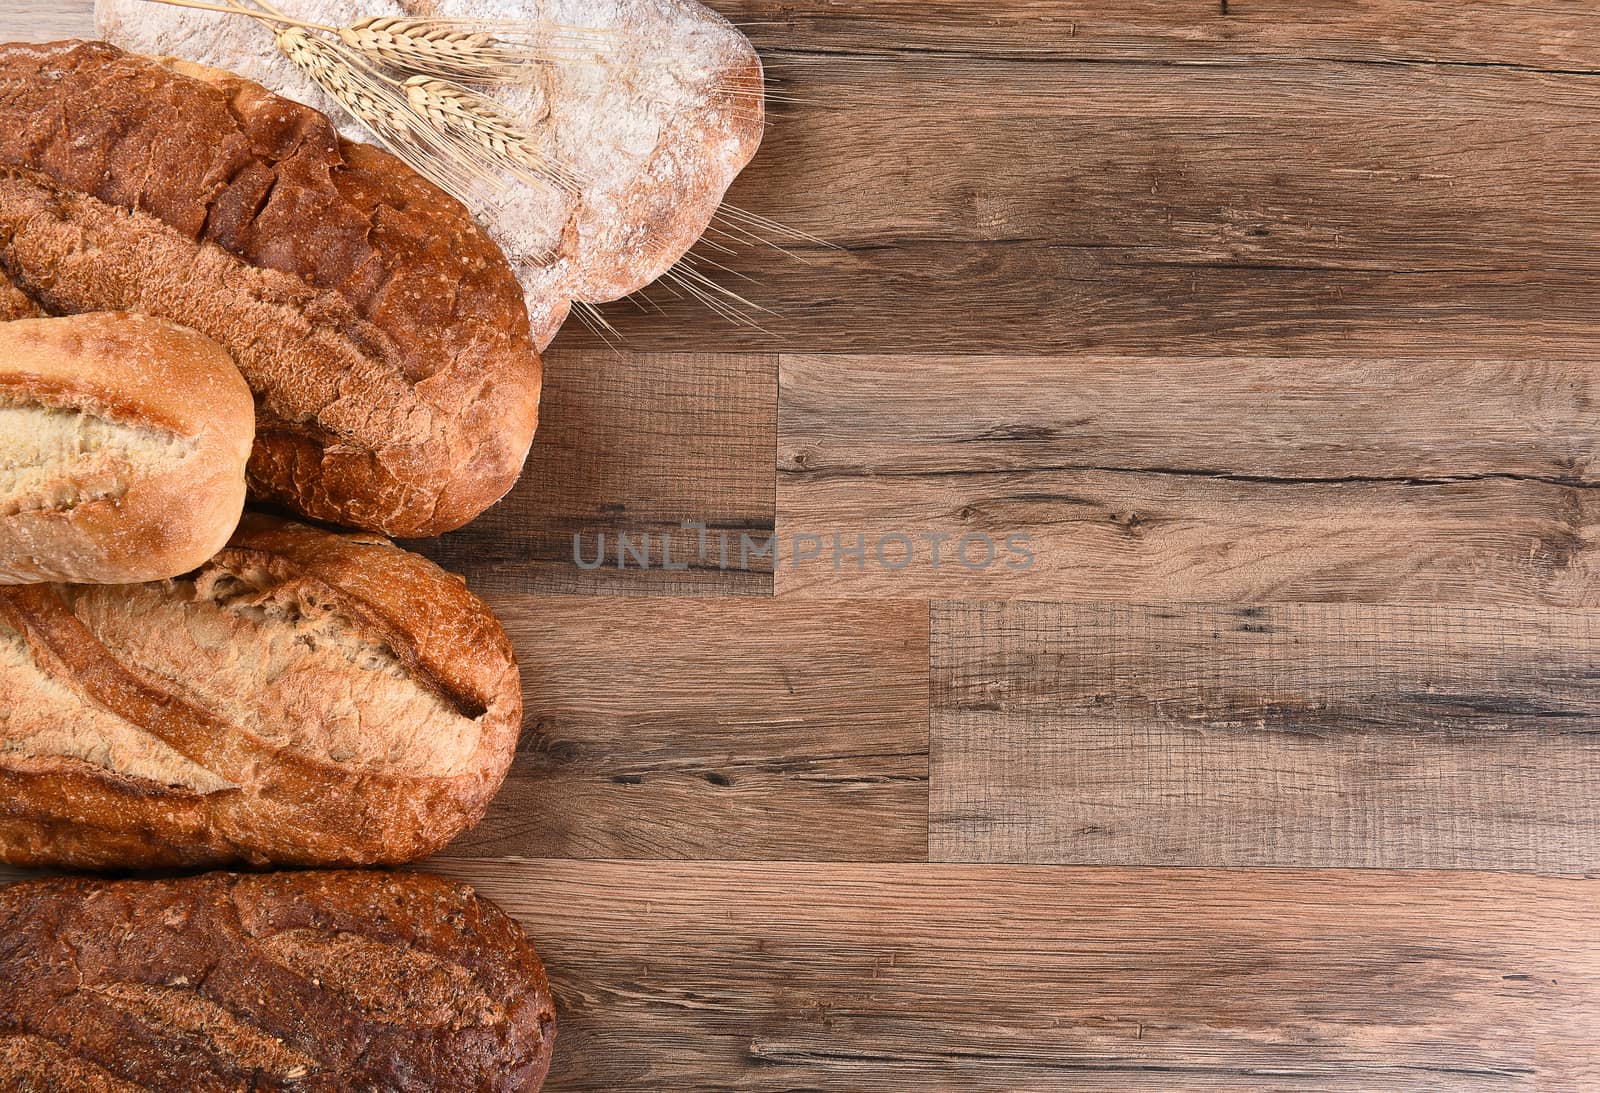 Five different loaves of bread on a wood table with copy space. Horizontal format.